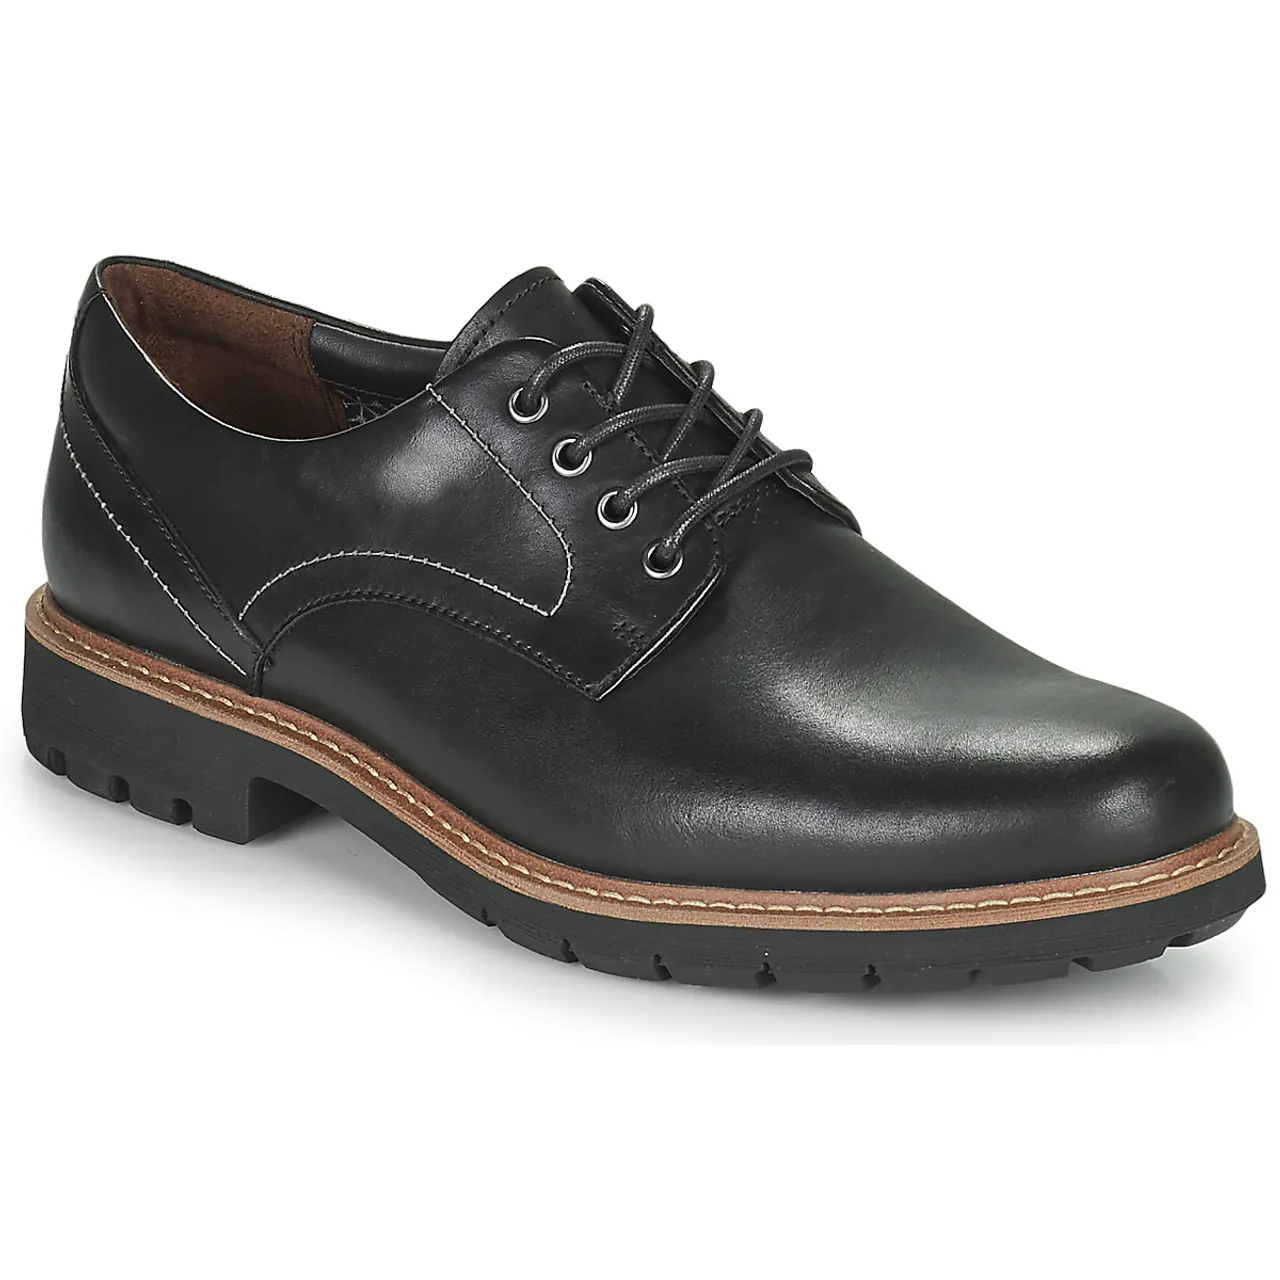 Clarks  BATCOMBE HALL  men's Casual Shoes in Black